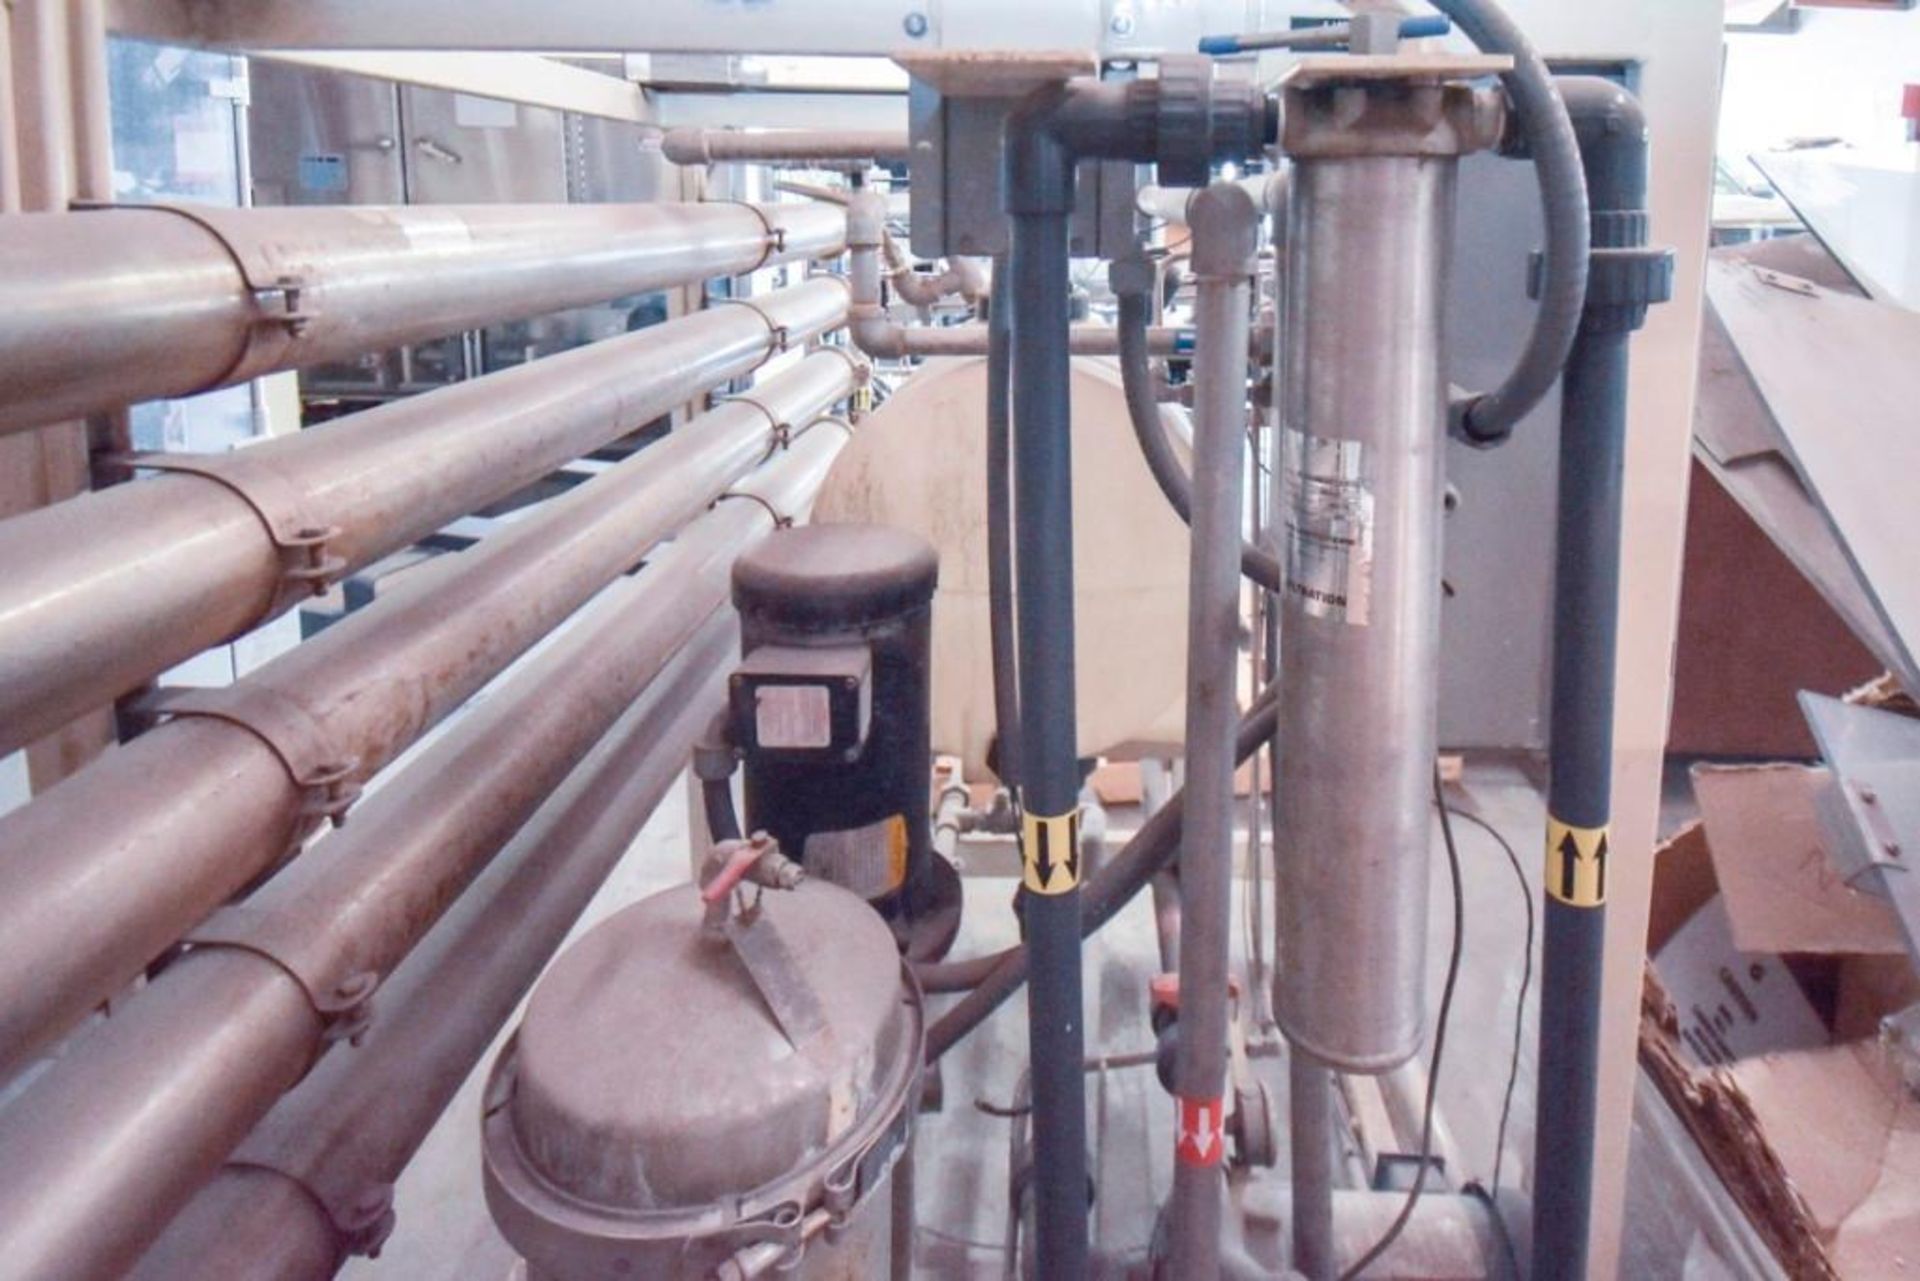 Severn Trent Reverse Osmosis system - Image 11 of 11